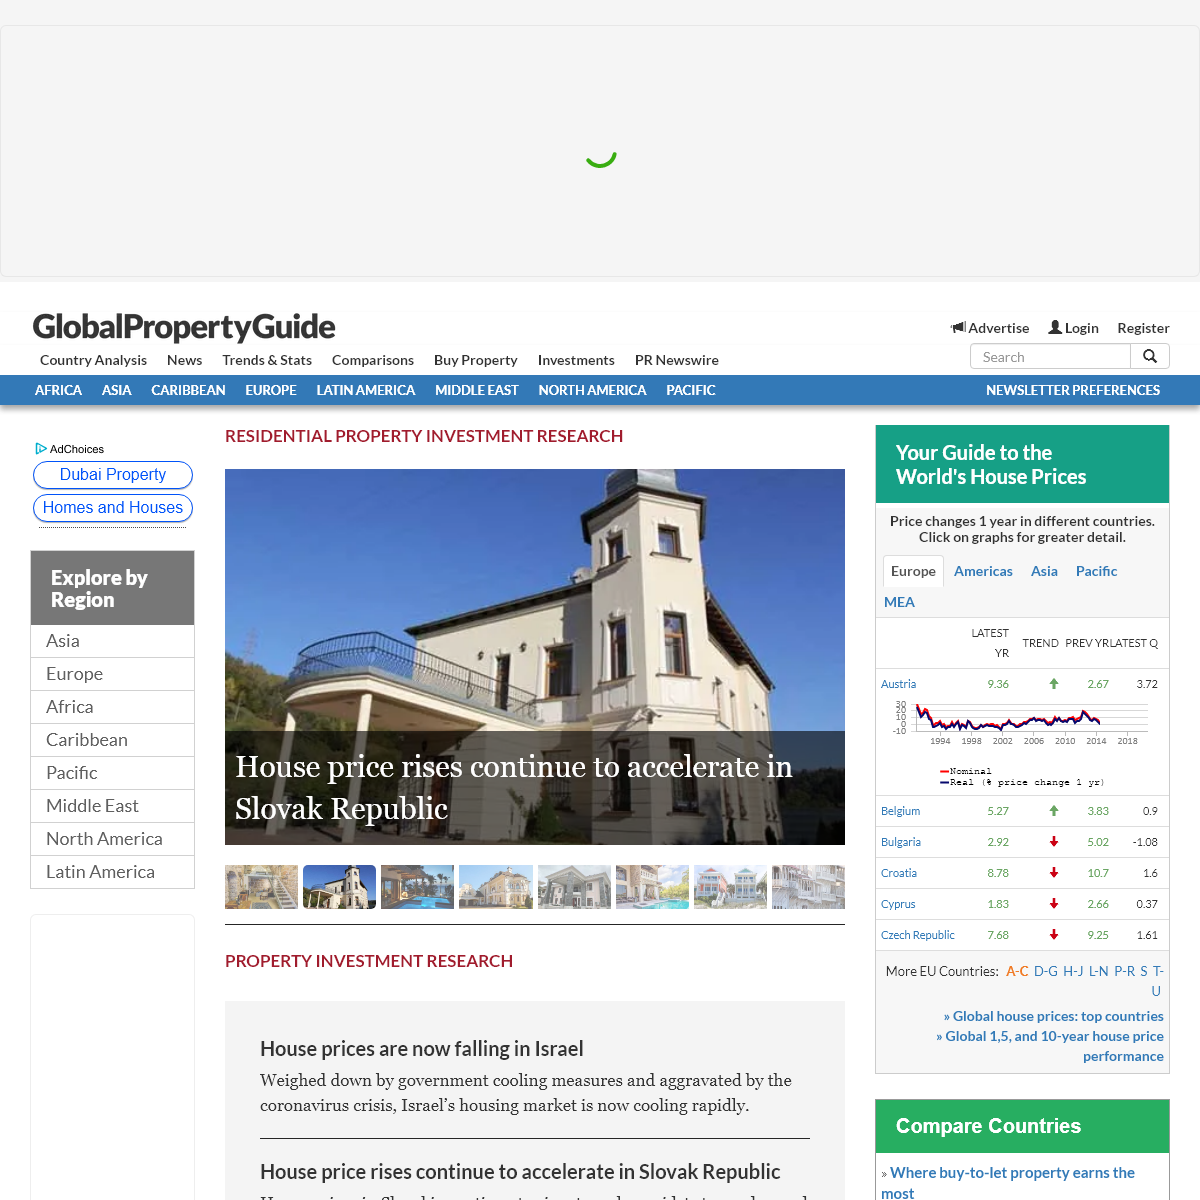 A complete backup of globalpropertyguide.com